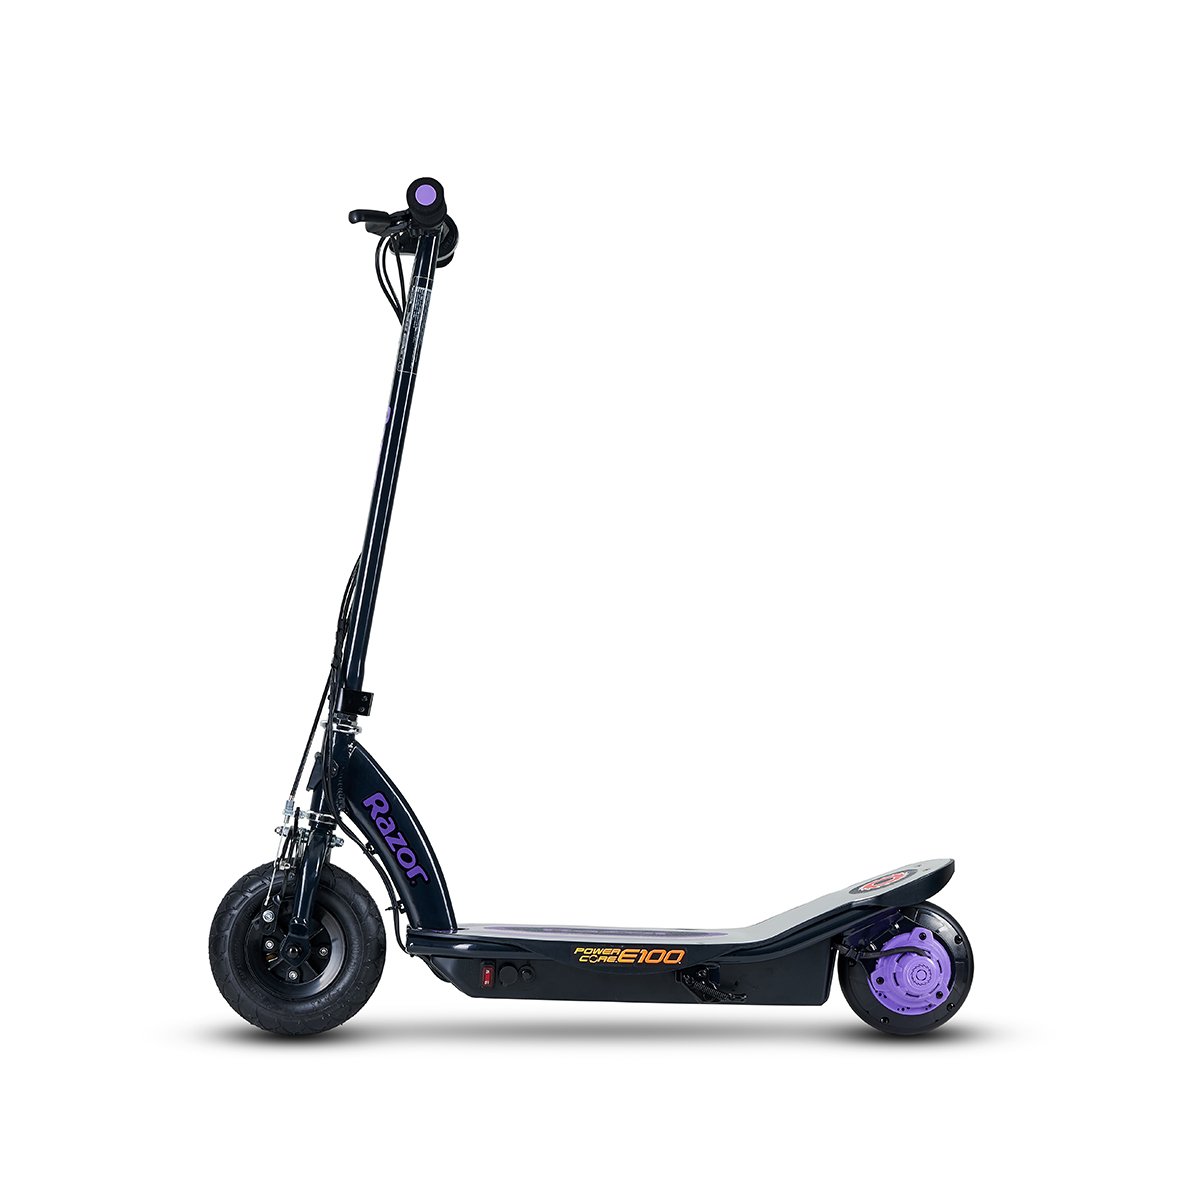 Razor E100 Electric Scooter Review - Fun But Flawed